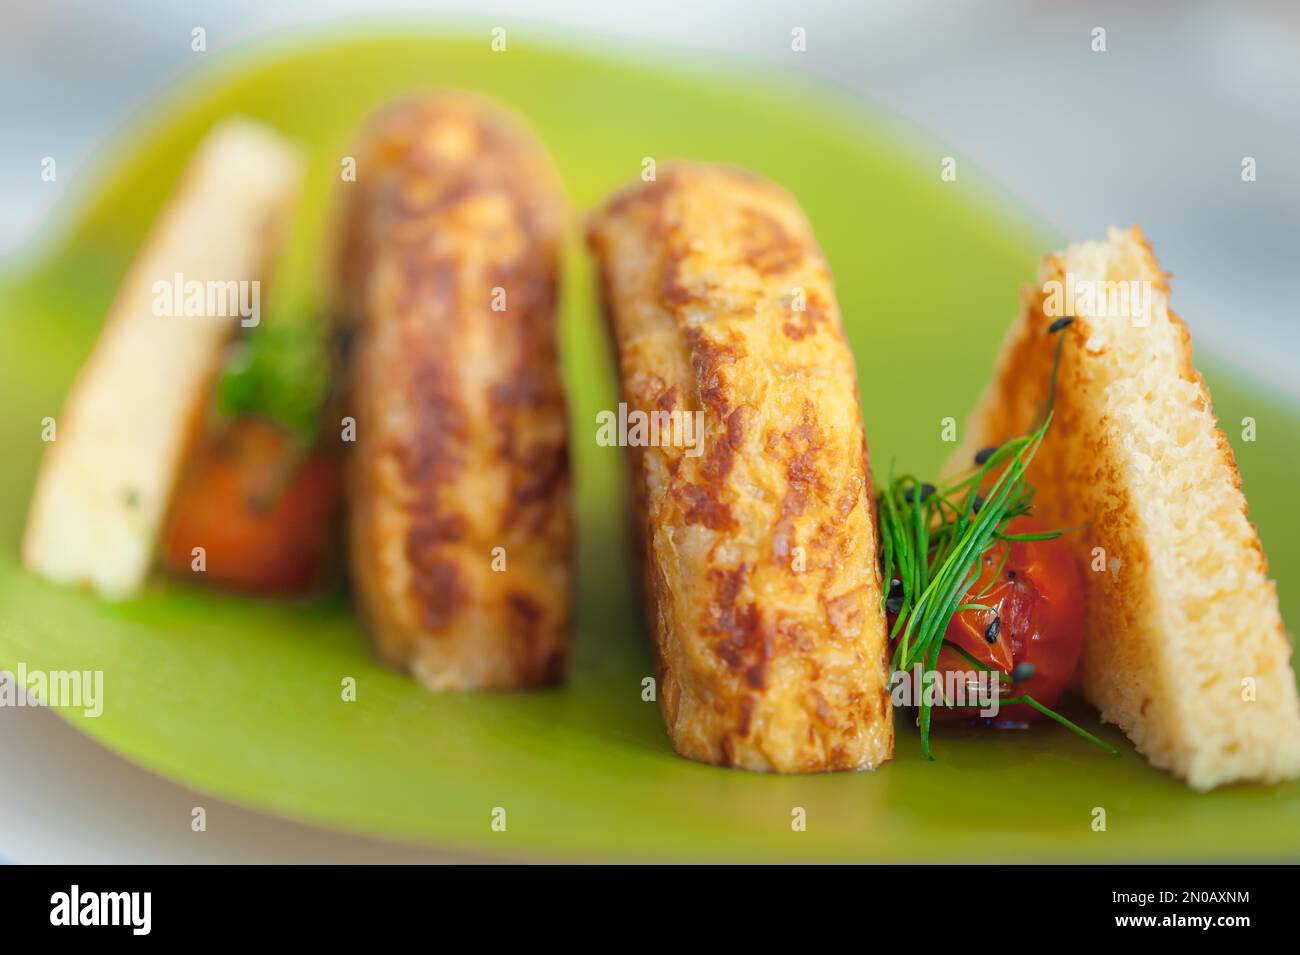 Close-up of Spanish Omelette with two slices of toast, cherry tomatoes, and chives. Breakfast meal of fried potatoes and eggs on a neon green plate. Stock Photo